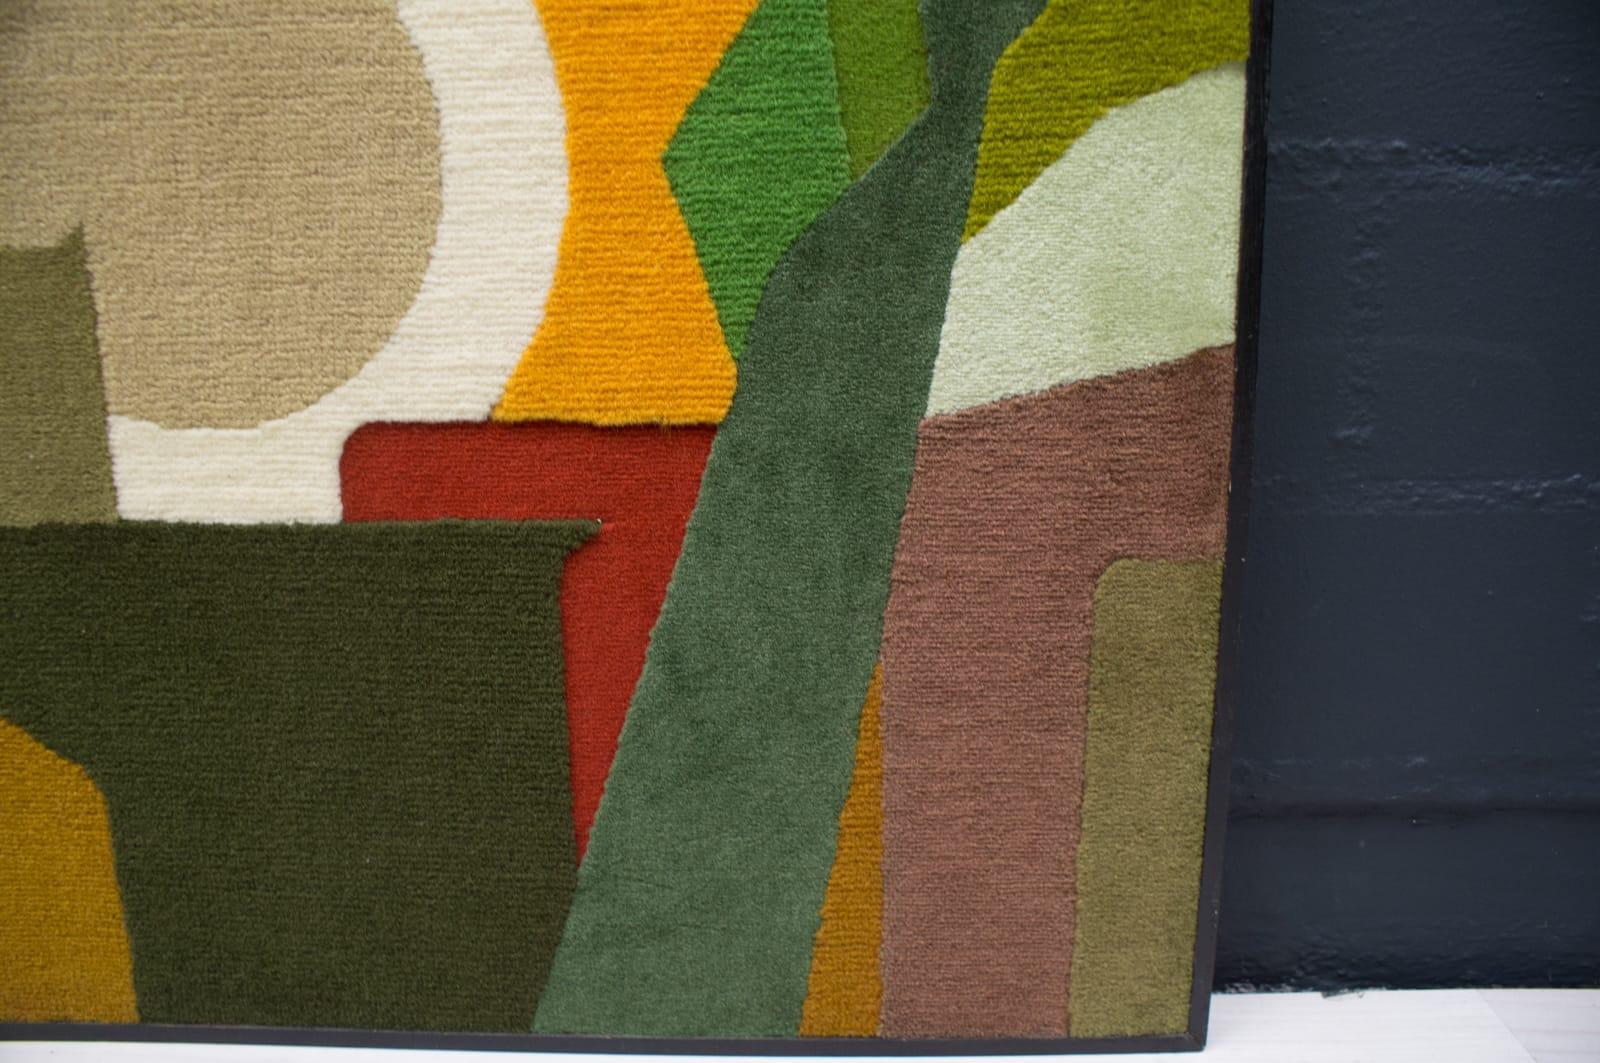 Late 20th Century Handmade Artist Tapestry with Summer Motif by Manfred Leib, 1985 Stuttgart